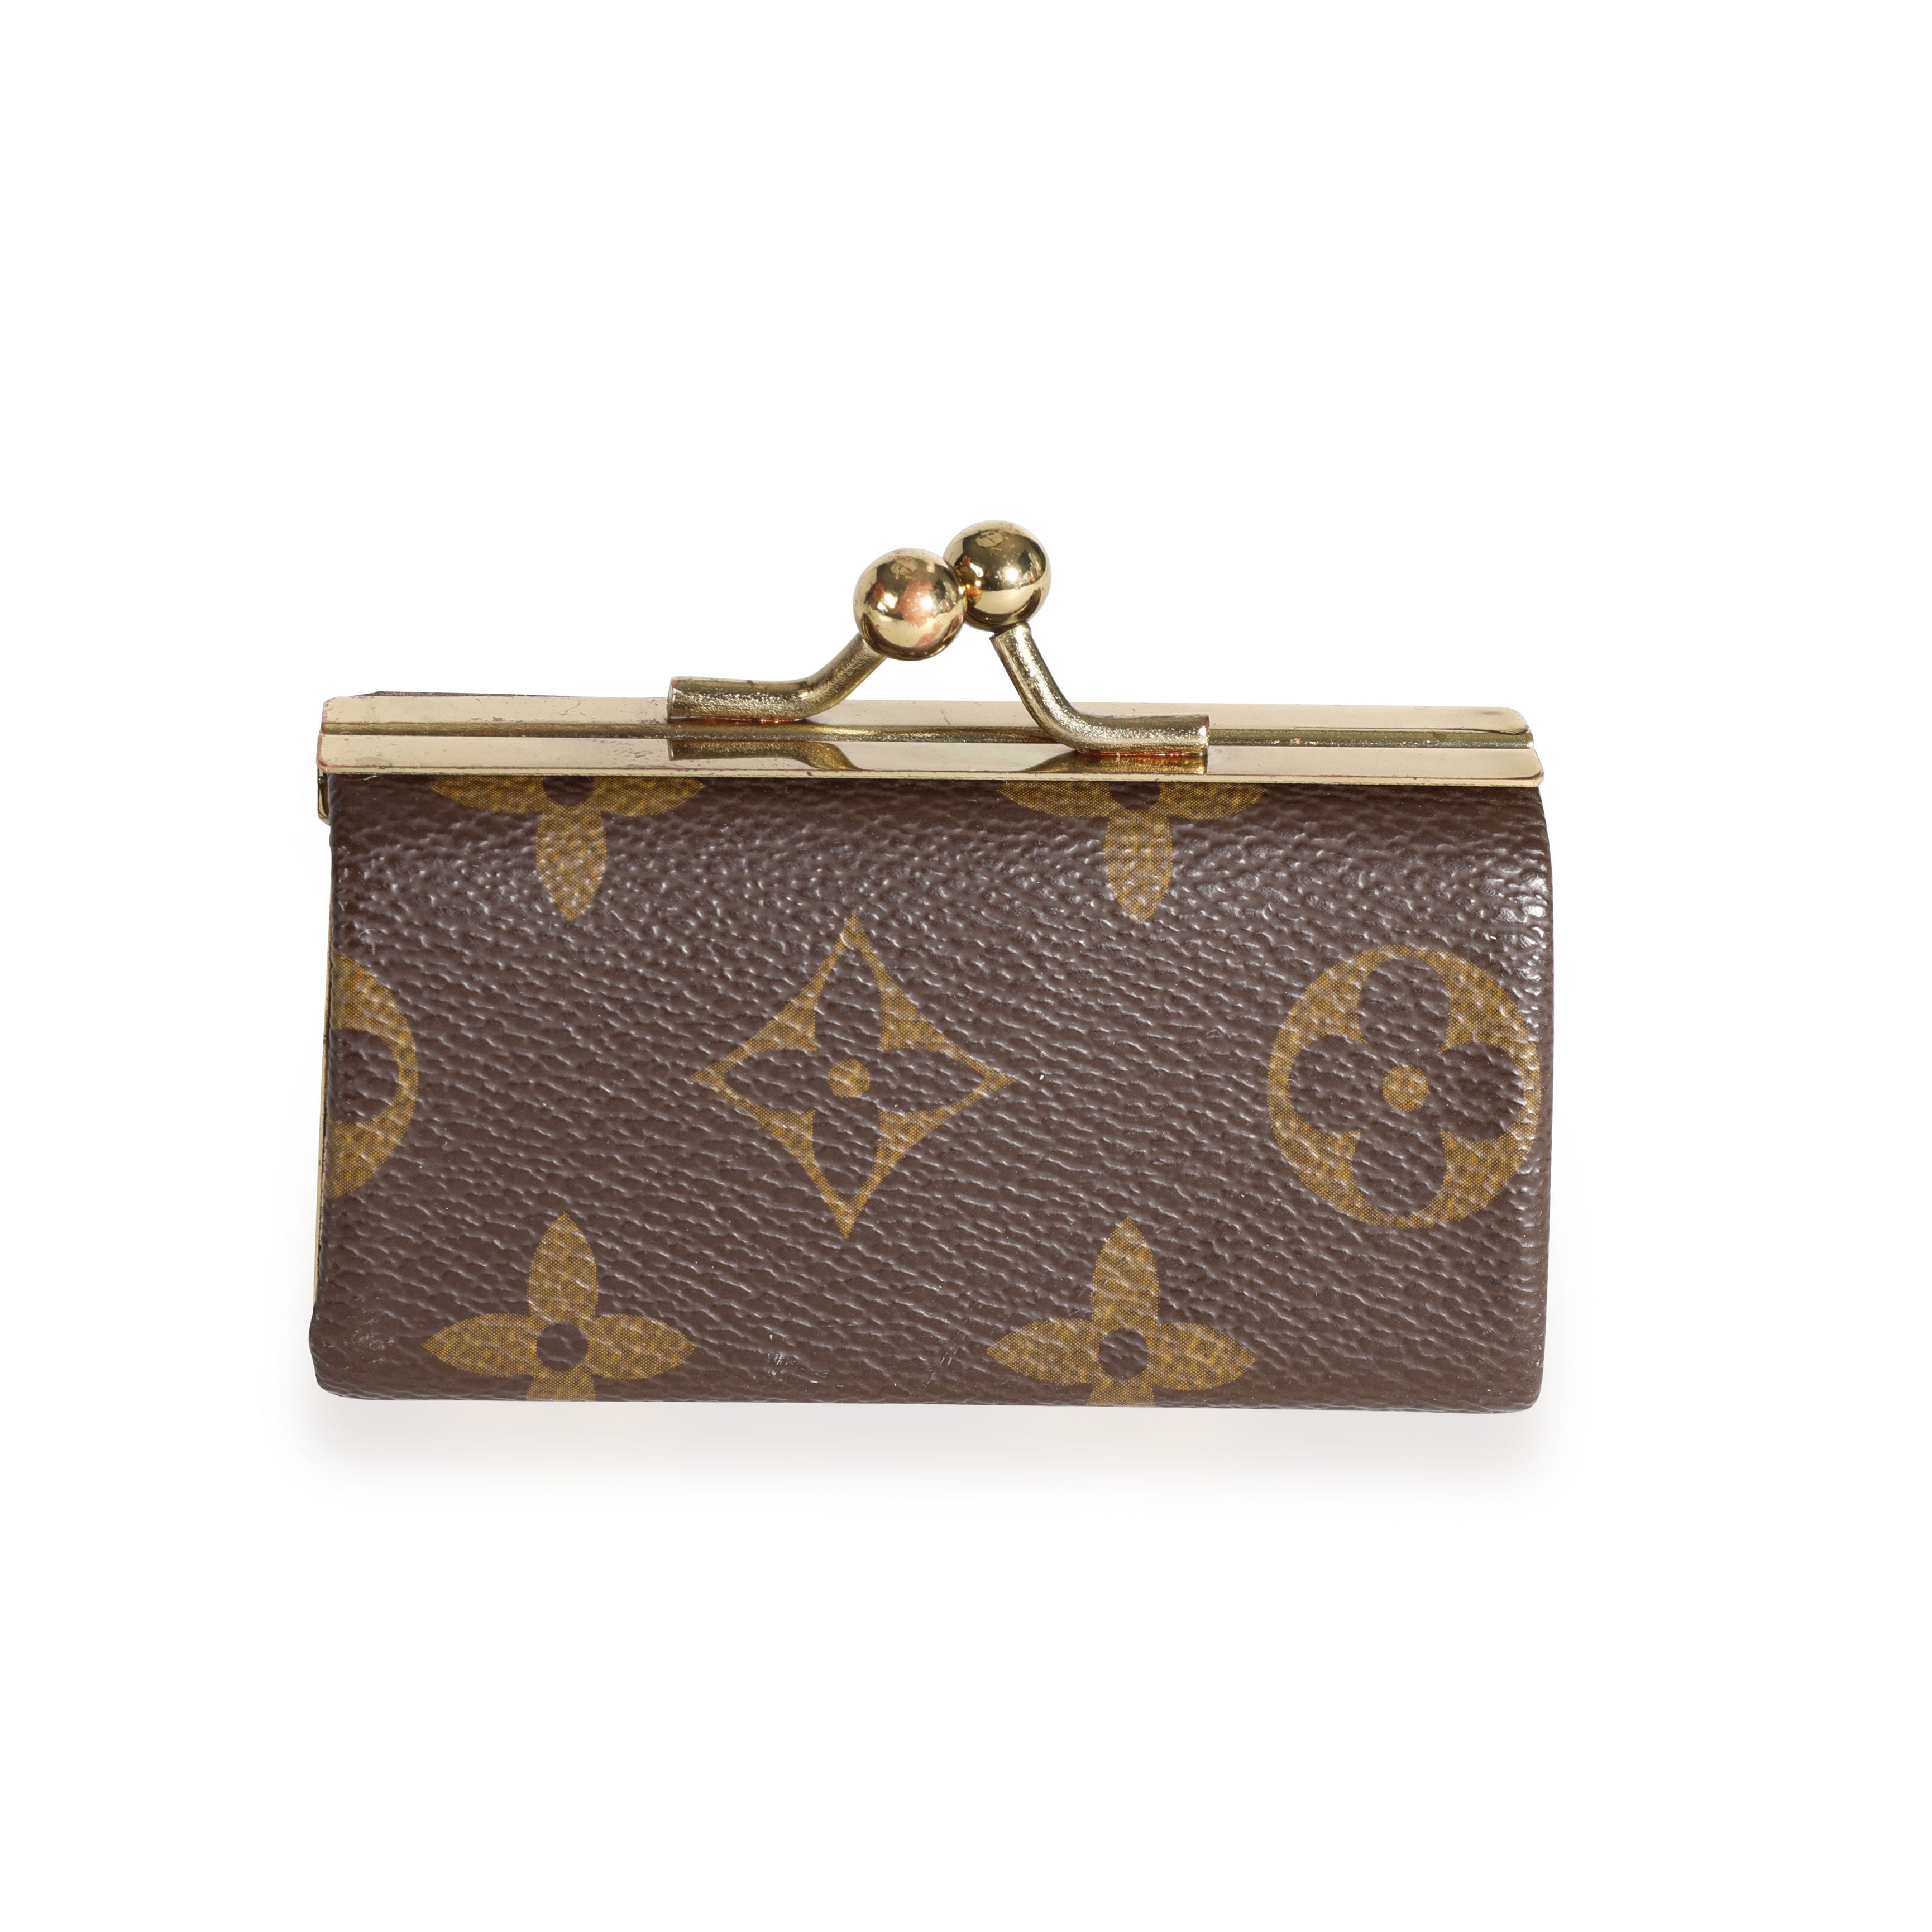 Louis Vuitton Is Launching a Monogram Lipstick Case - Where to Buy